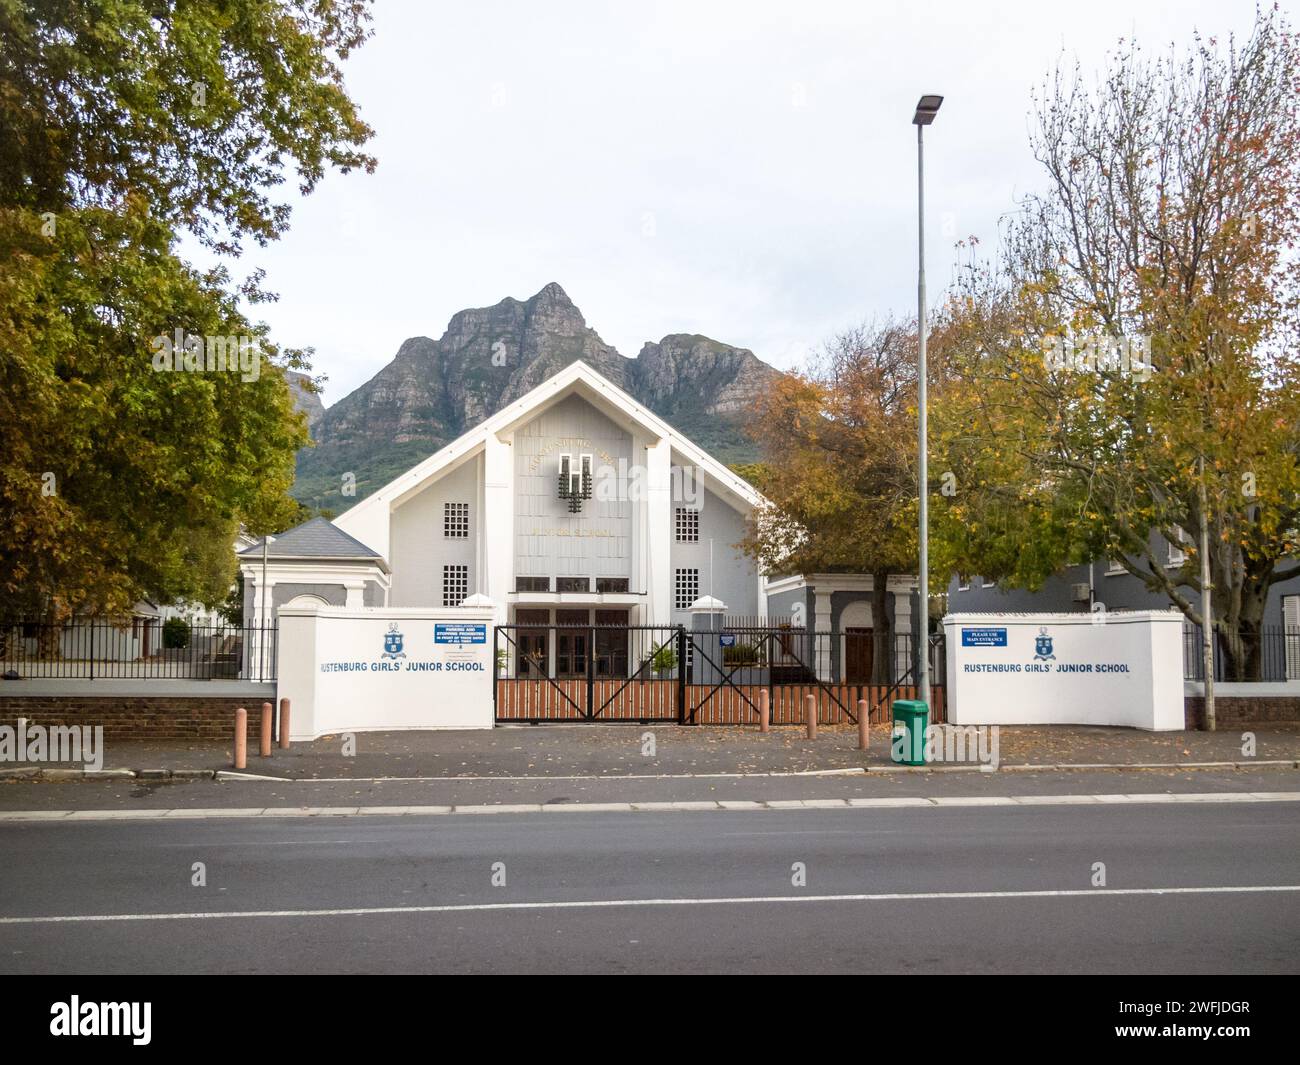 Rustenburg girls junior school in Rondebosch, Cape Town, South Africa closed during the Covid pandemic Stock Photo